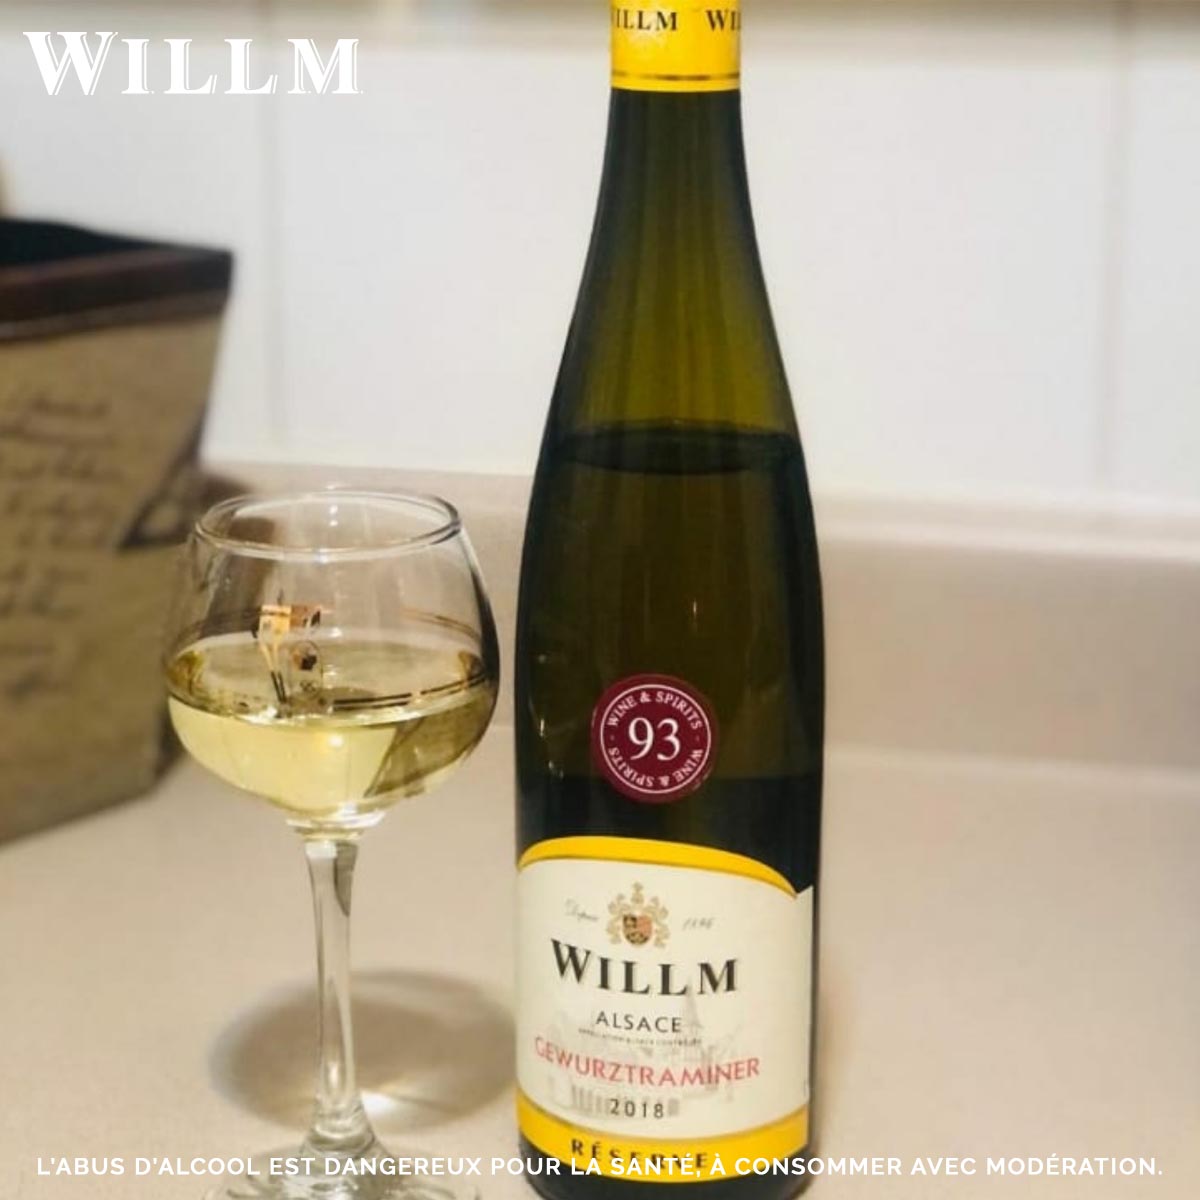 Our wines are regularly cited in various international magazines! Our #Gewurztraminer Reserve was highlighted in the latest US @WineandSpirits magazine. #drinkalsace #alsacerocks #wineandspirits #alsacewillm #willm #alsace #alsacewine #winelovers